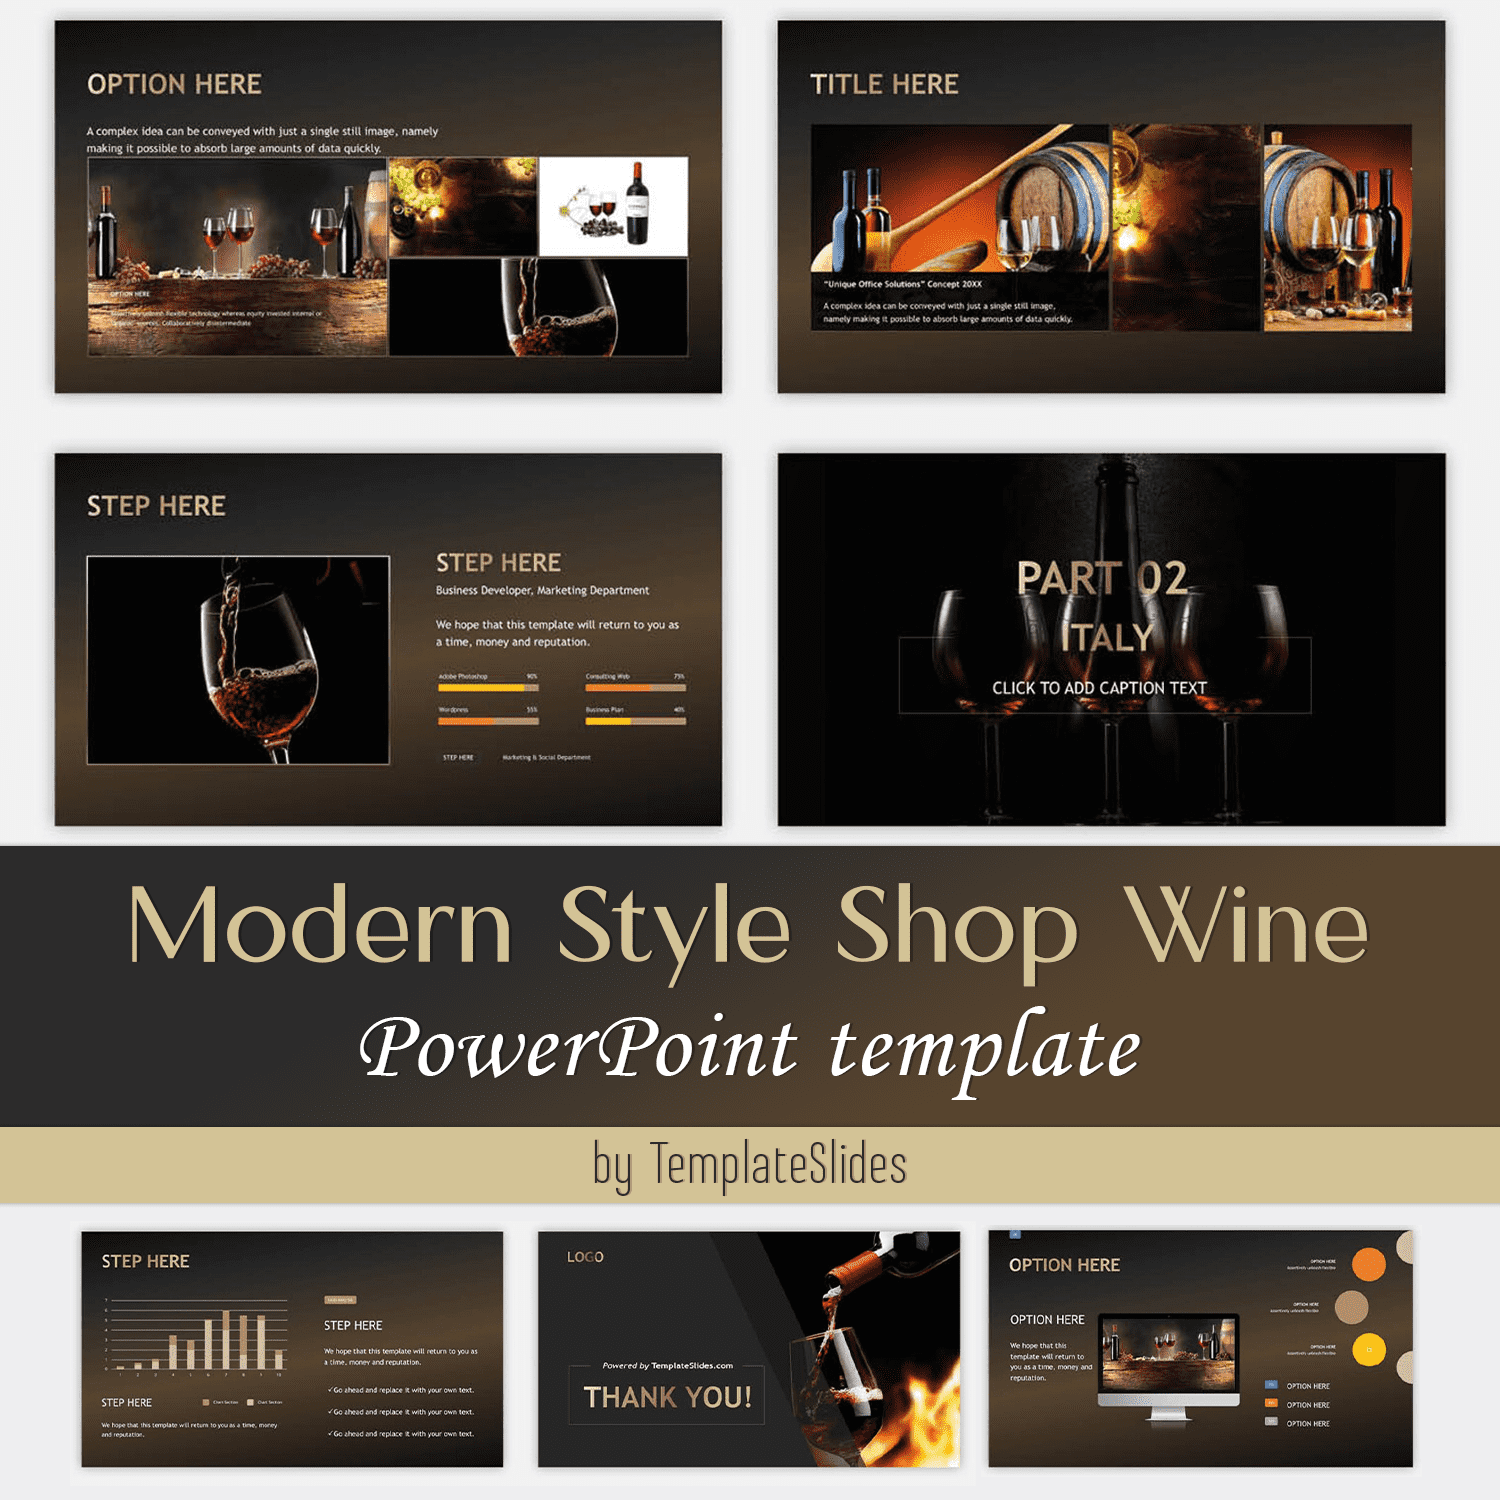 Modern Style Shop Wine PowerPoint Template Cover.